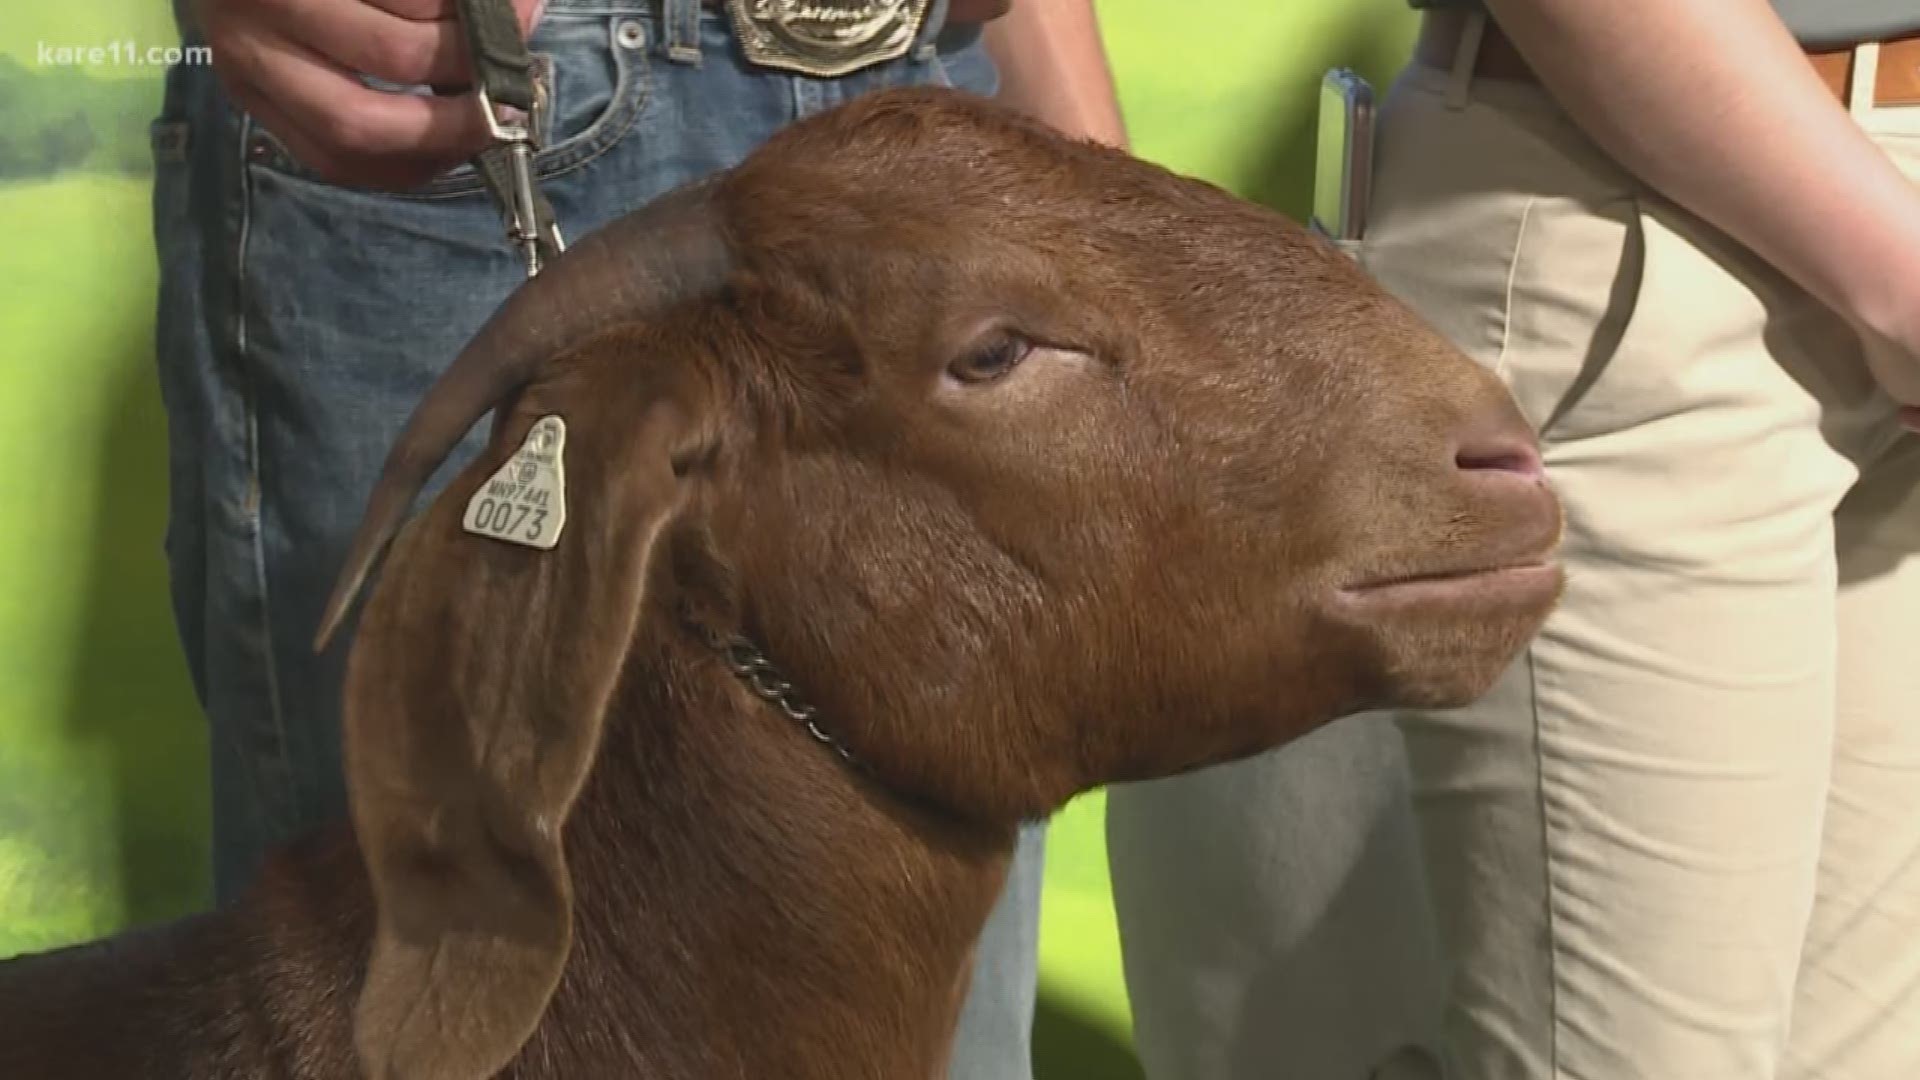 Four members of the FFA bring their animals to the KARE 11 Barn at the Minnesota State Fair.